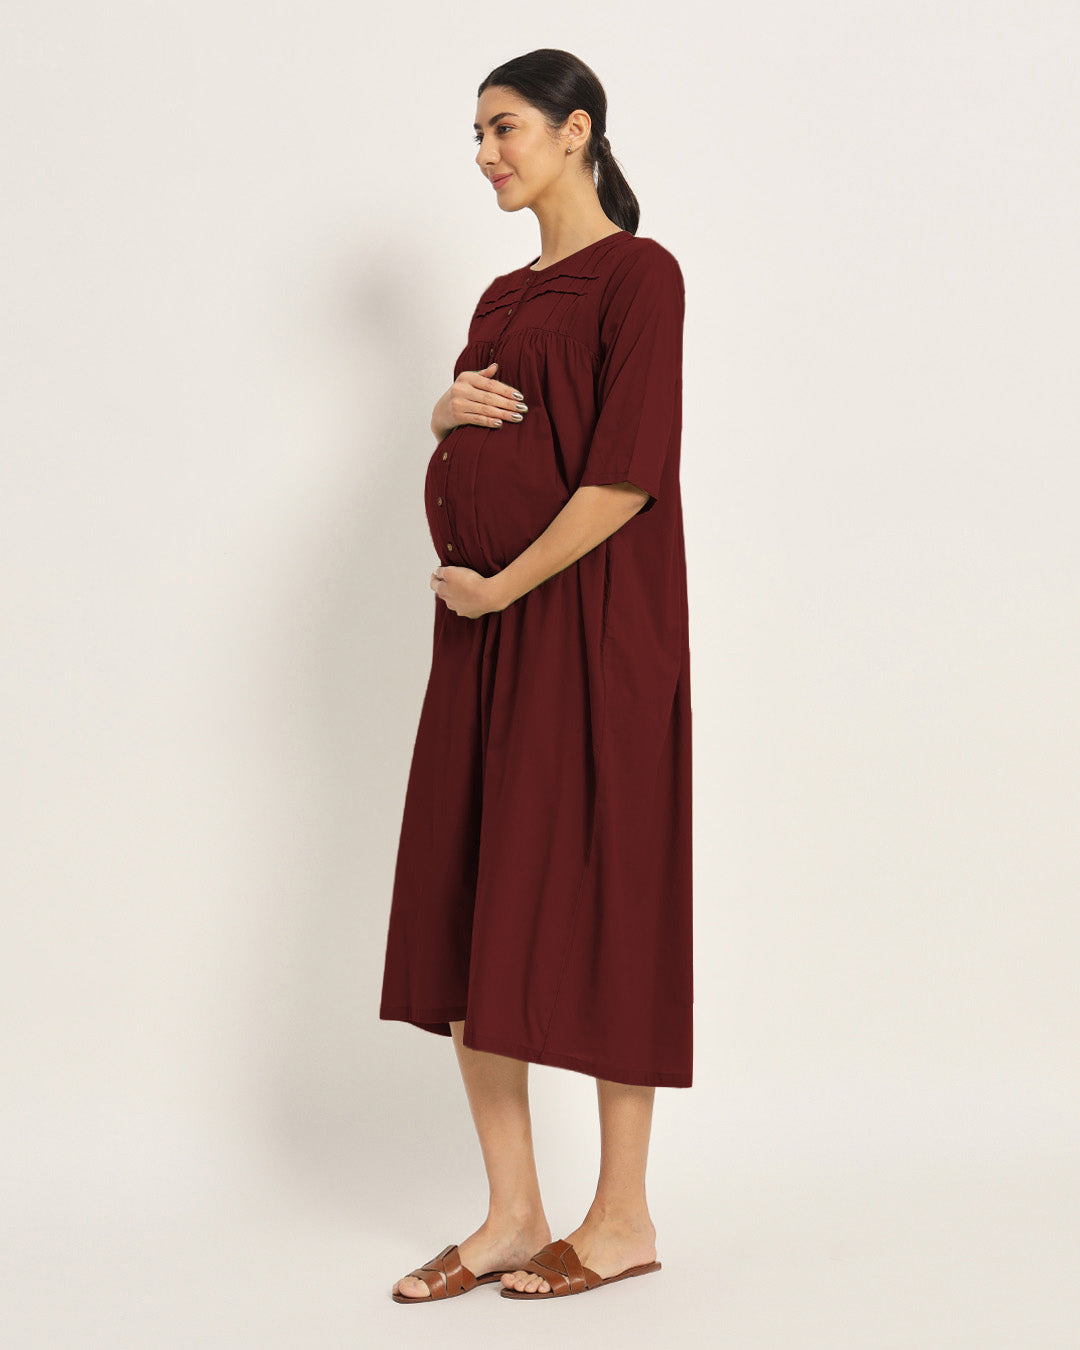 Combo: Russet Red & Wisteria Purple Mommy-to-Be Marvel Maternity & Nursing Dress